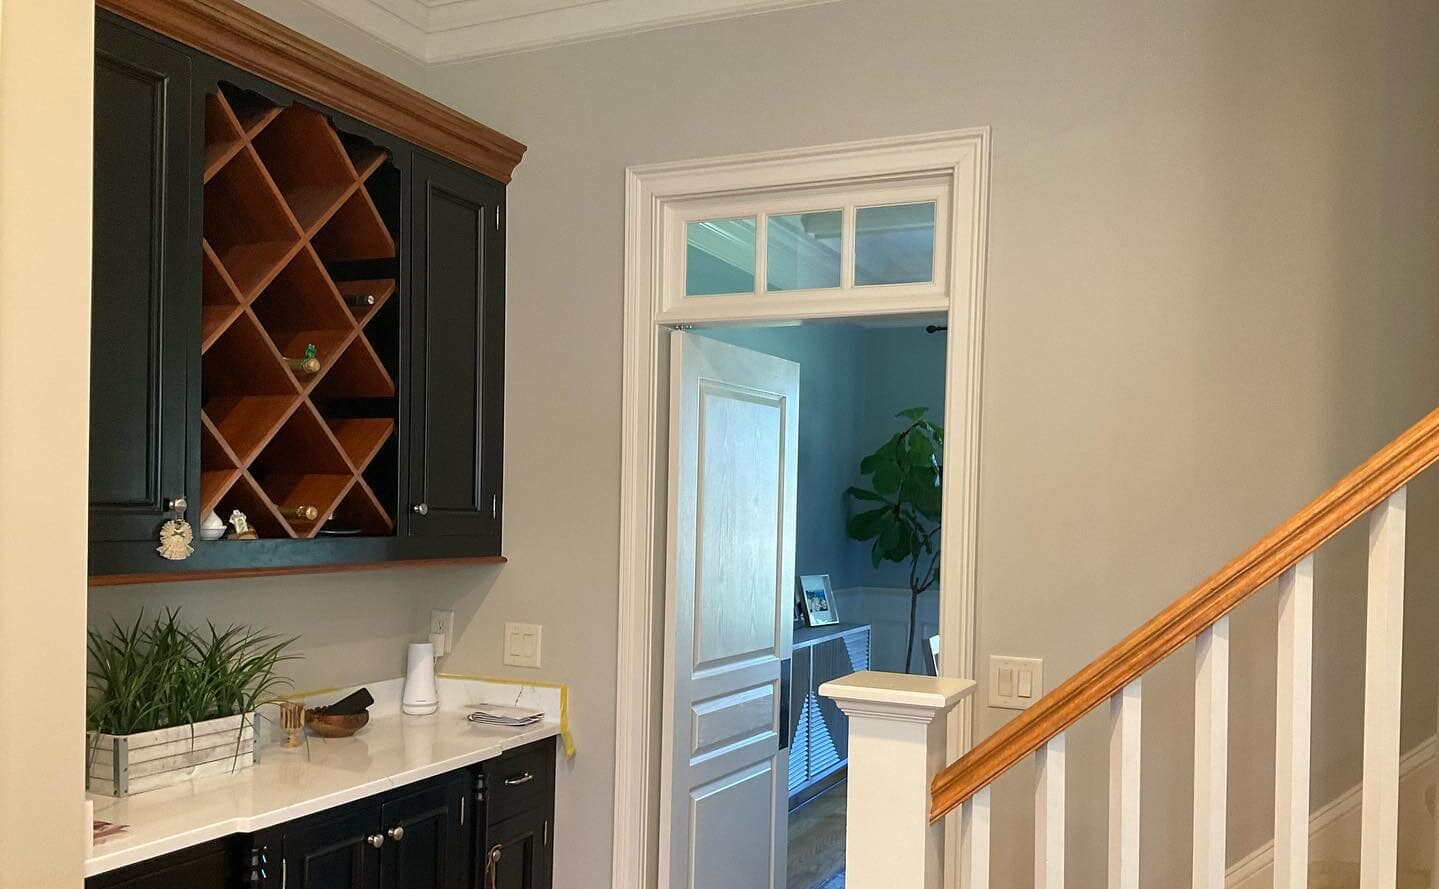 Enhance your home's appeal with interior house painting services in Holly Springs, NC.